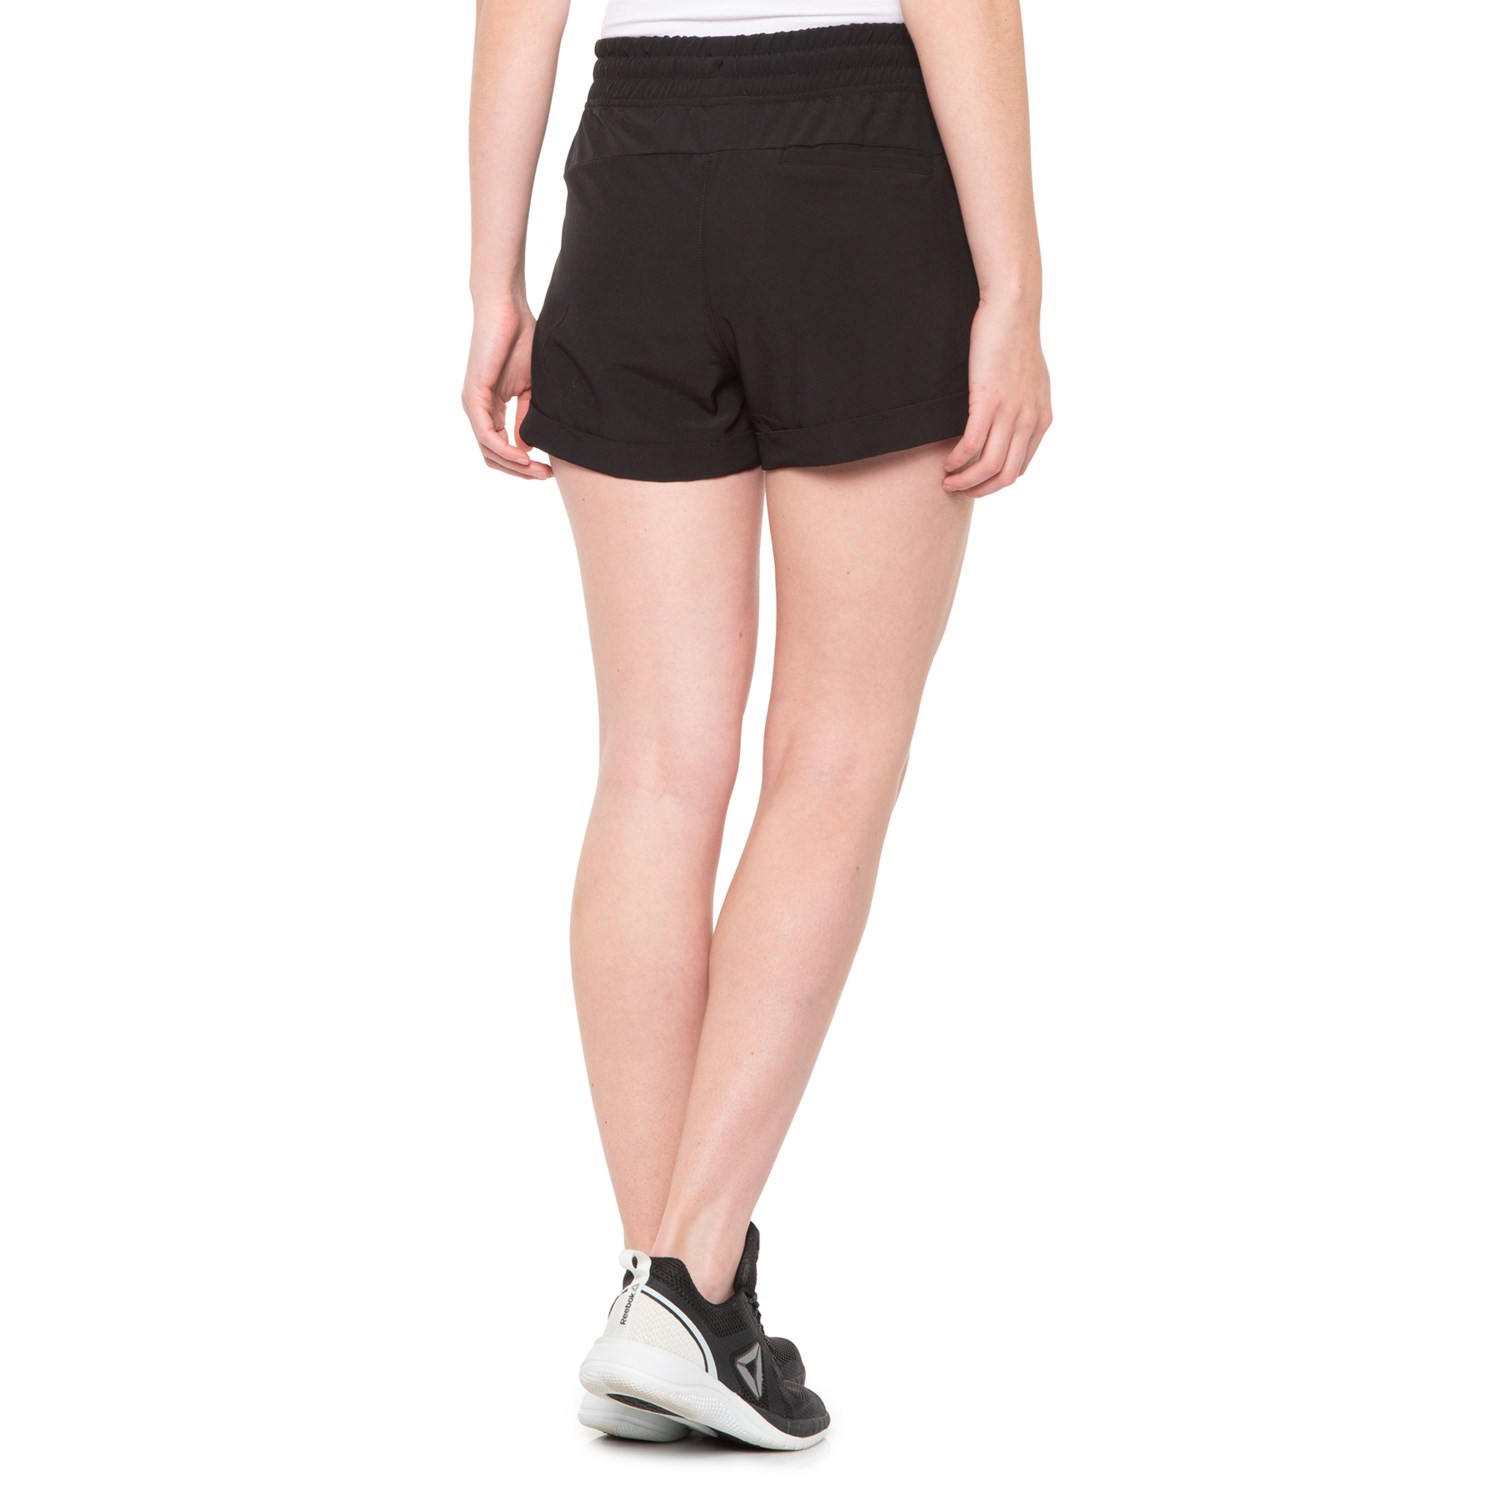 90 DEGREE Woven Roll-Cuffed Shorts (For Women) - Save 87%